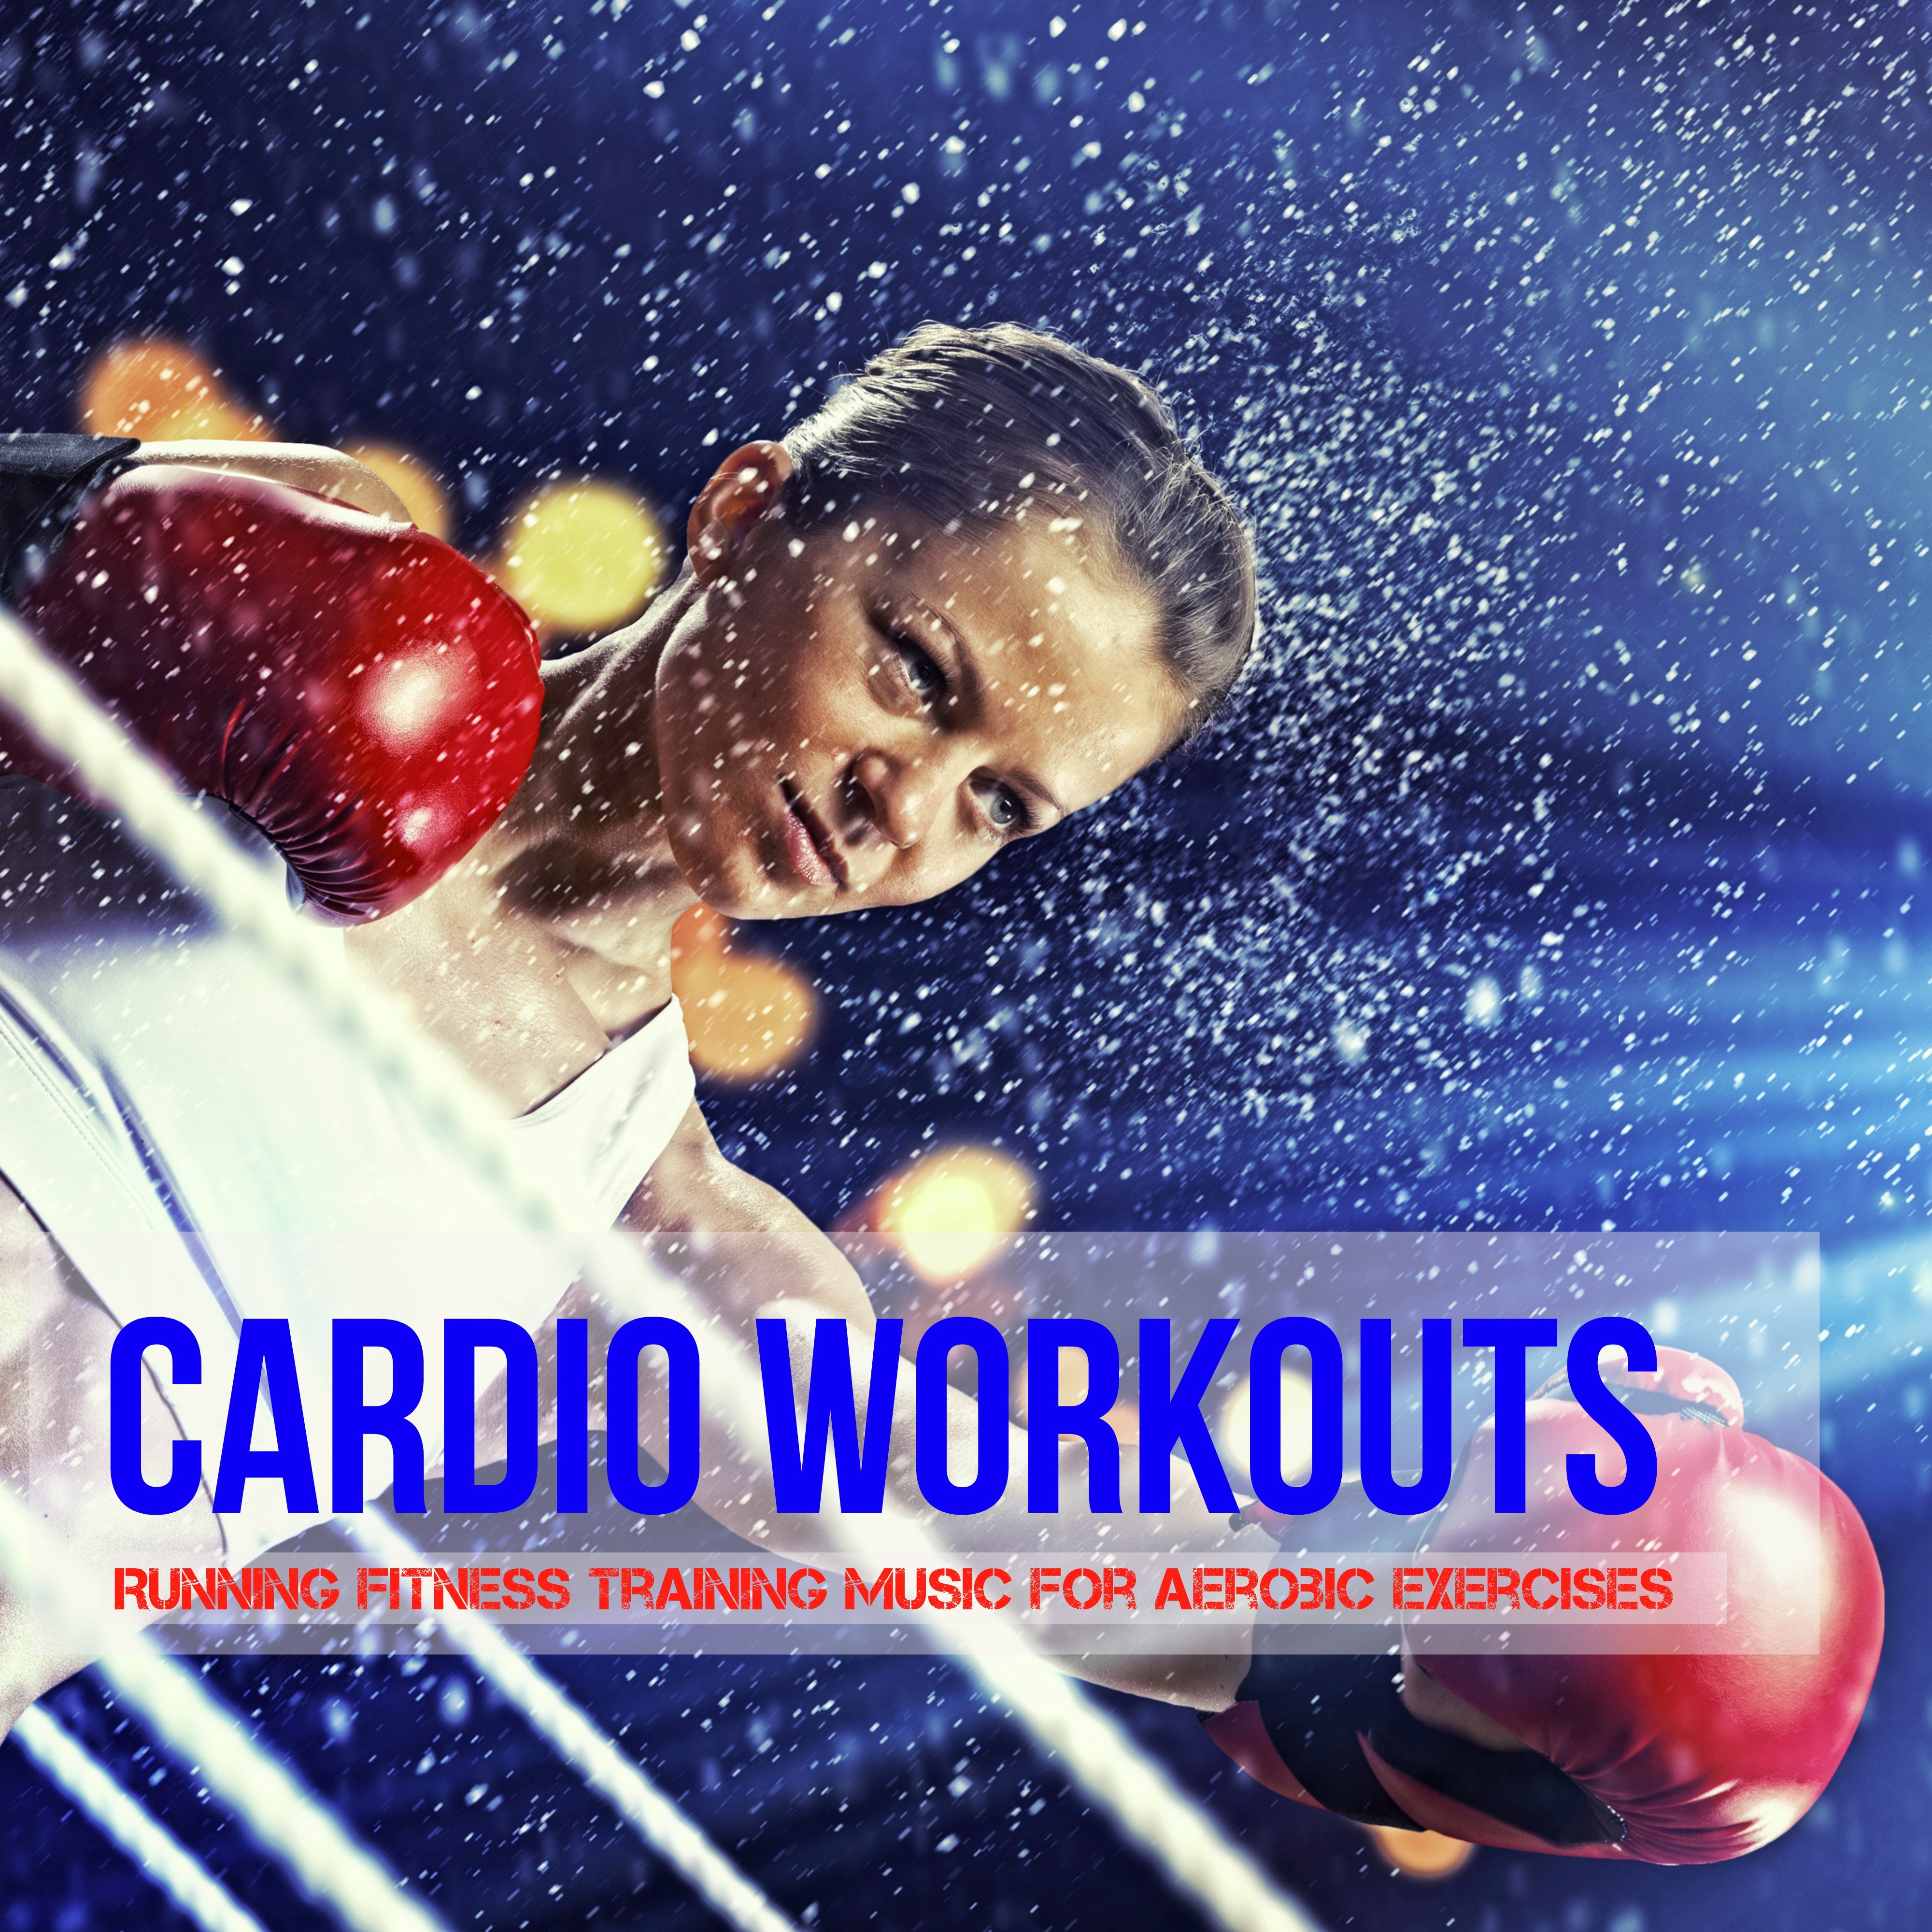 Cardio Workouts - Running Fitness Training Music for Aerobic Exercises with Deep House Electro Techno Sounds